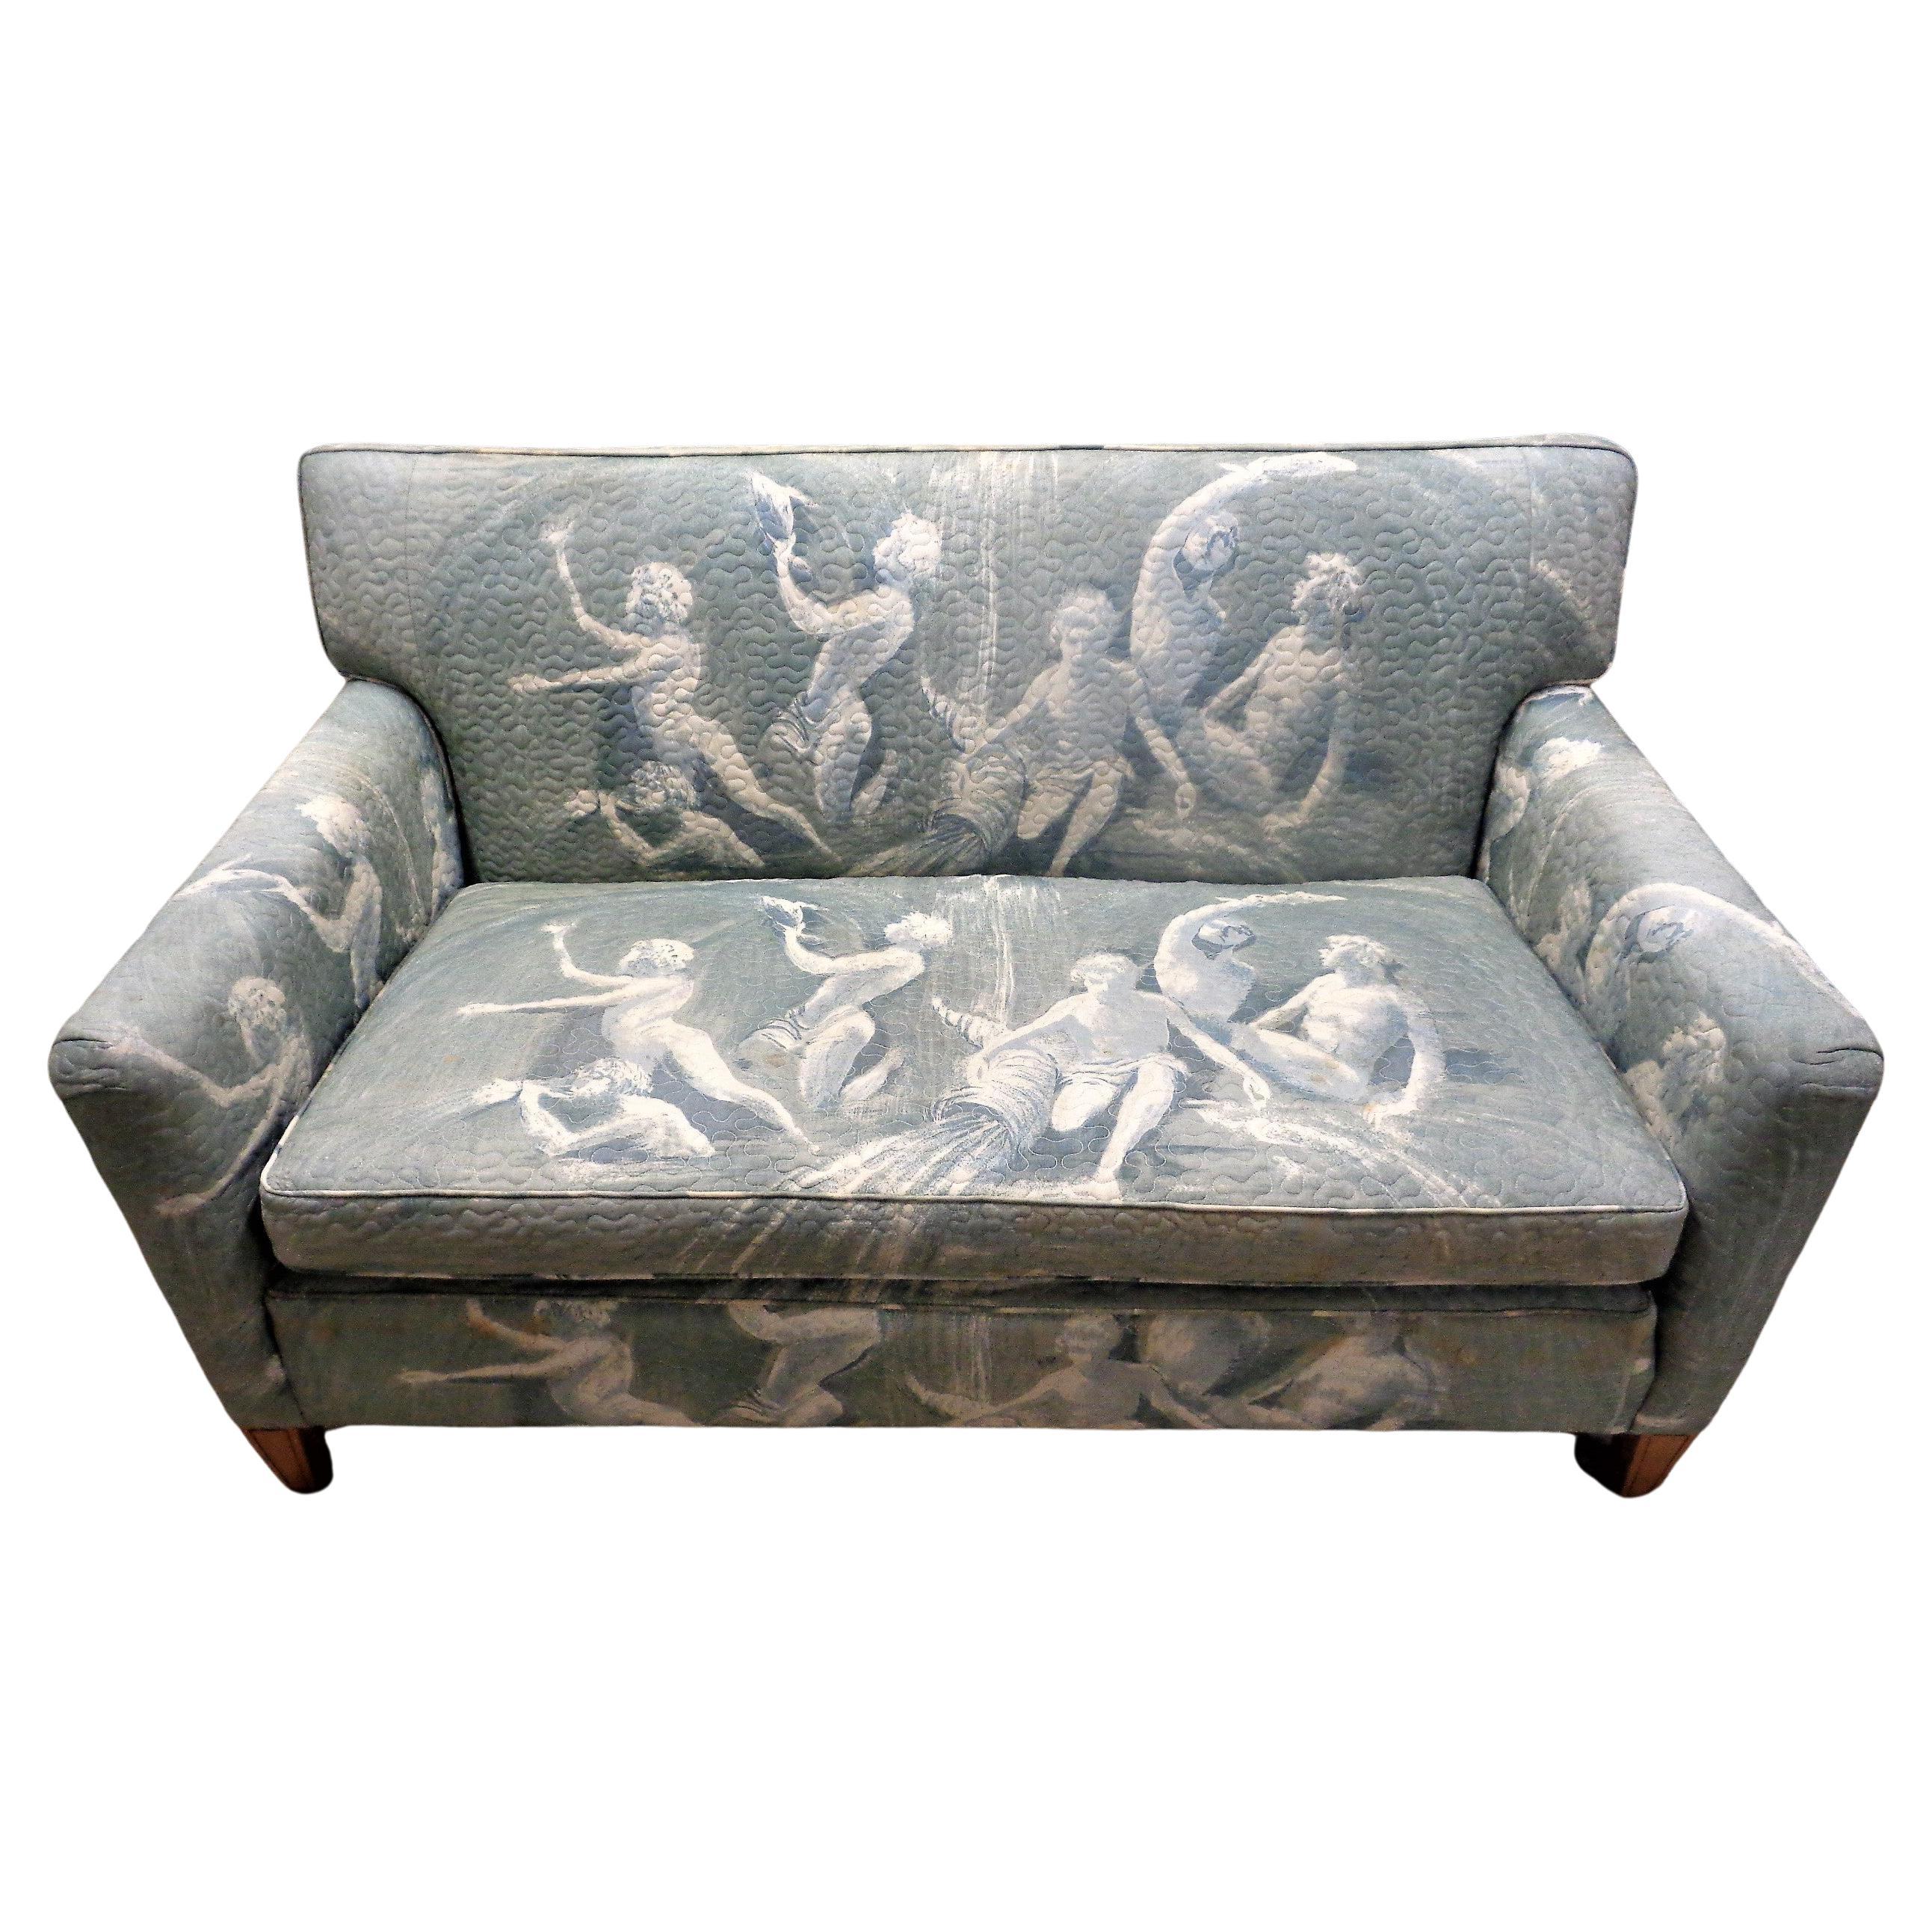  Hollywood Regency tuxedo form loveseat w/ an exotic vintage stitched quilted design cotton upholstery in overall decoration showing mythological faun figures, fish, shell in scenic seascape. Circa 1940-1960. Look at all pictures and read condition